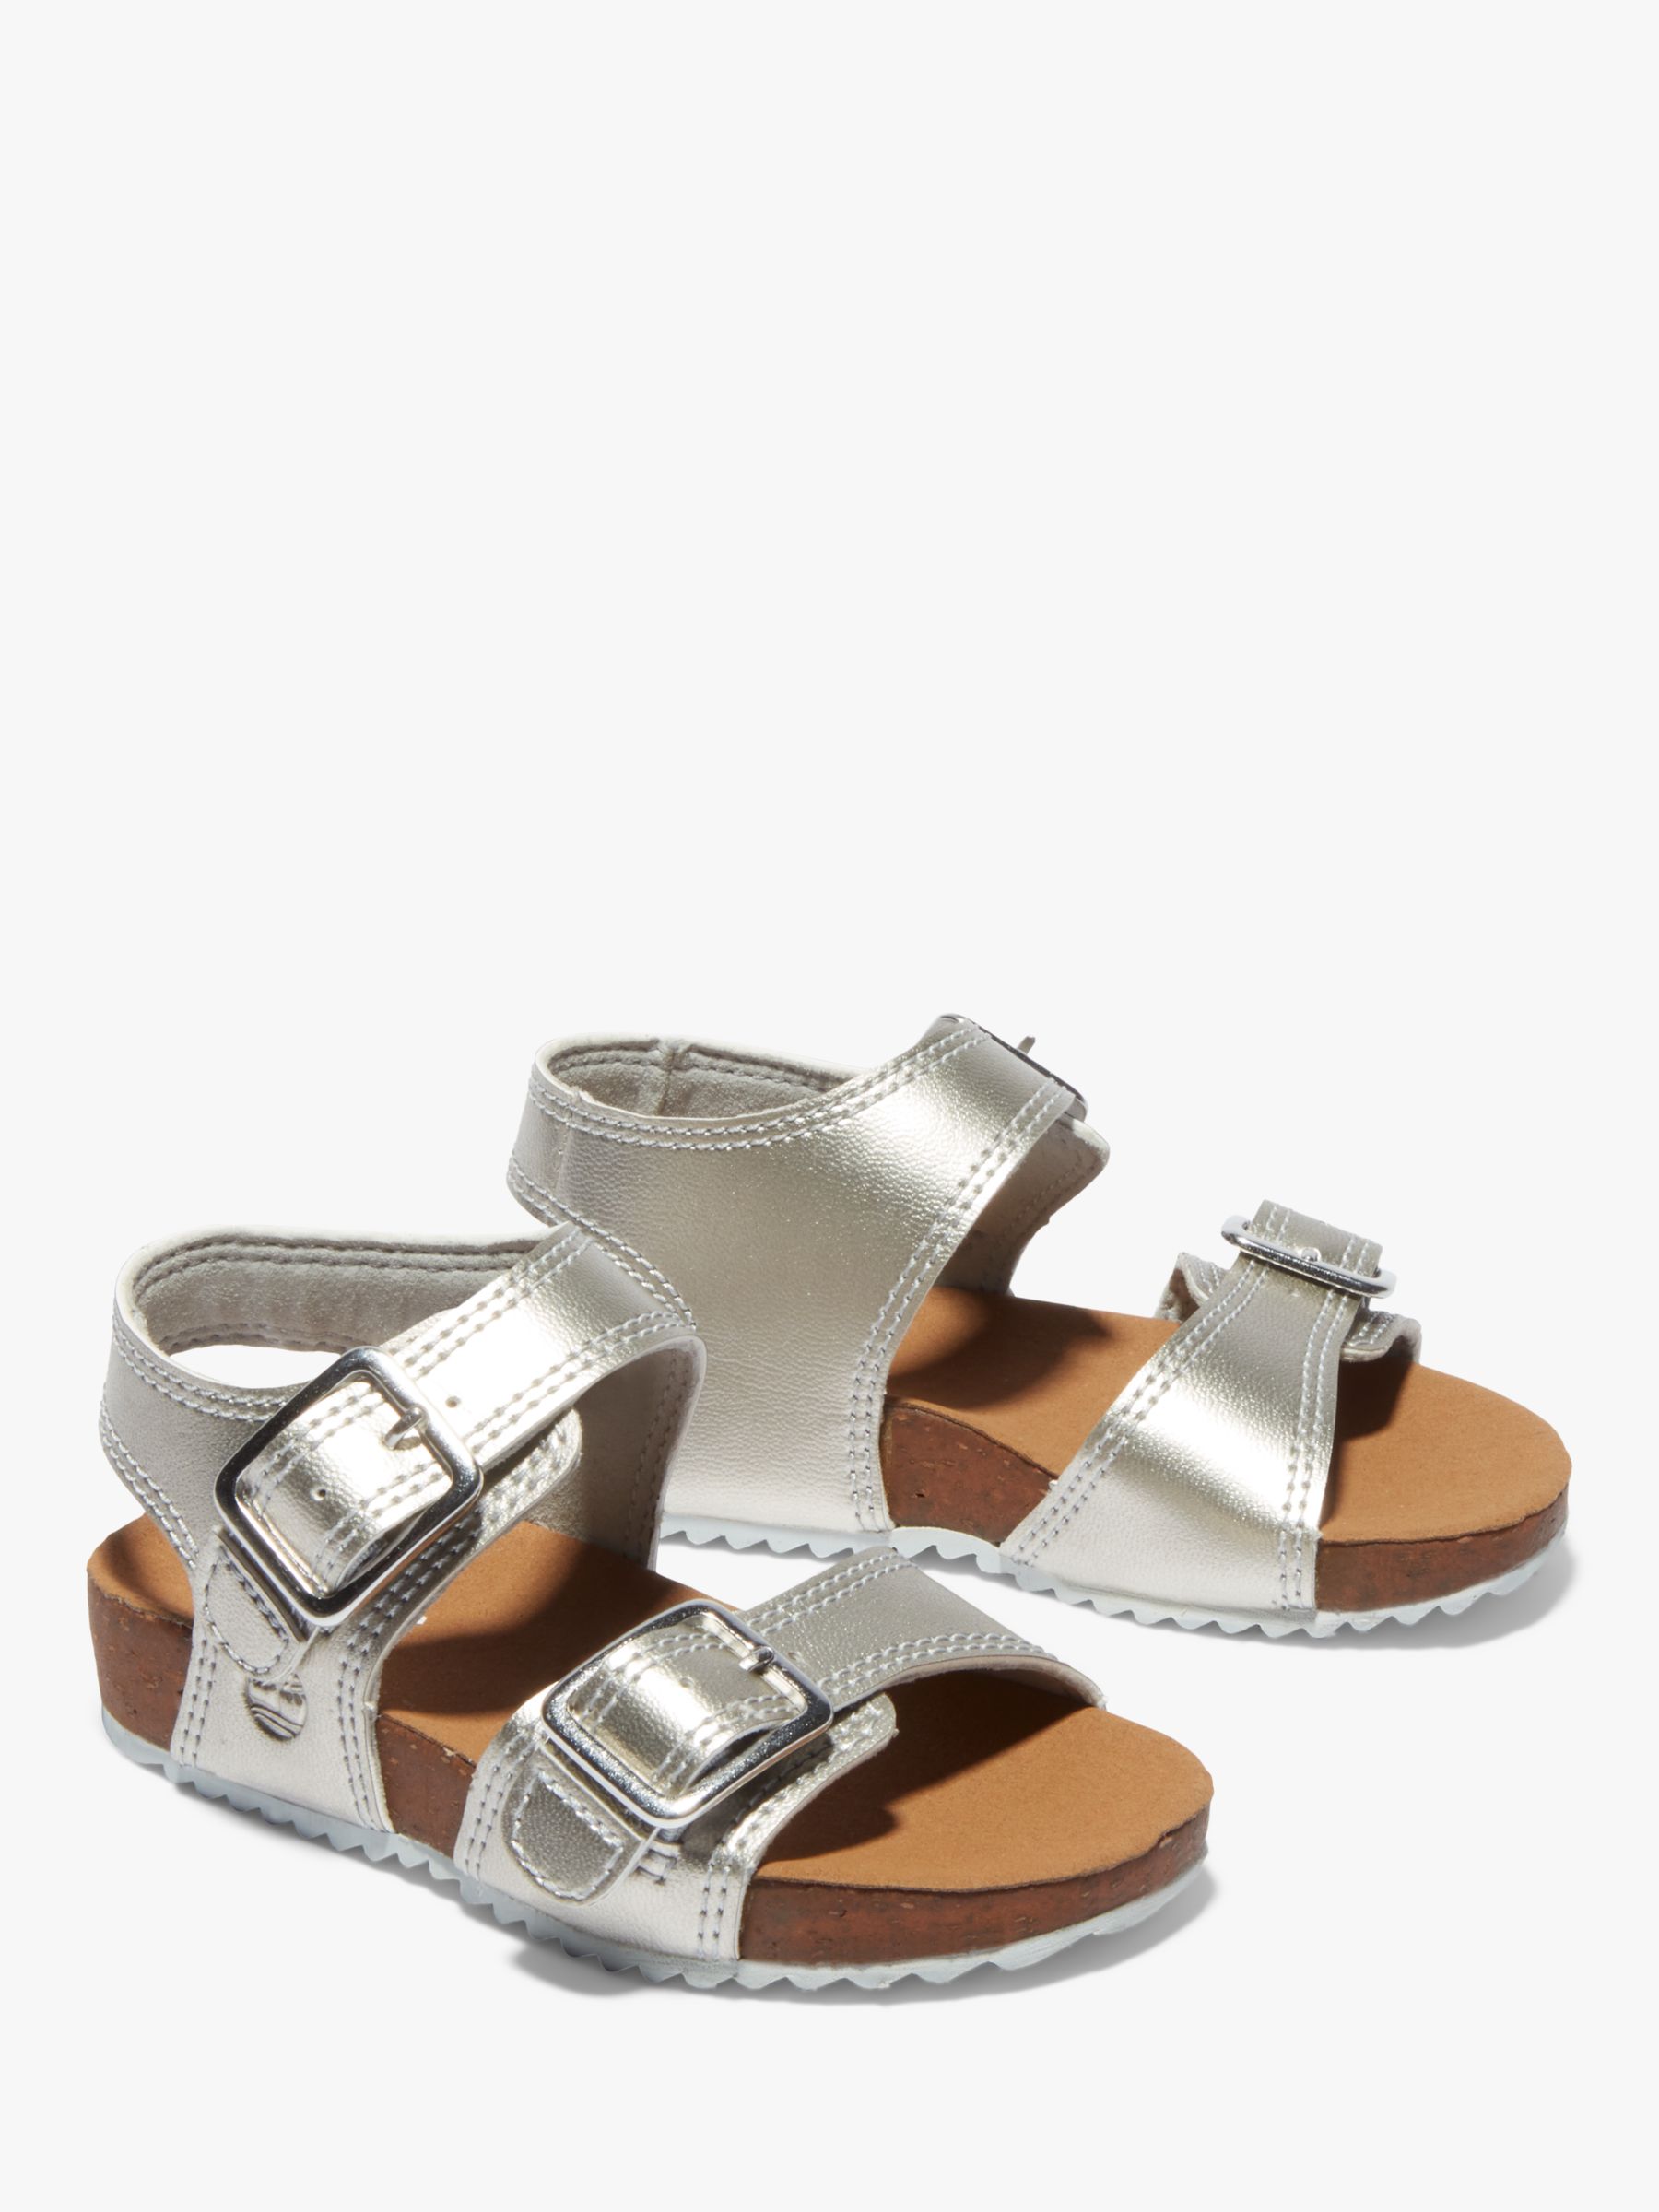 Timberland Children's Castle Island Sandals, Silver at John Lewis ...